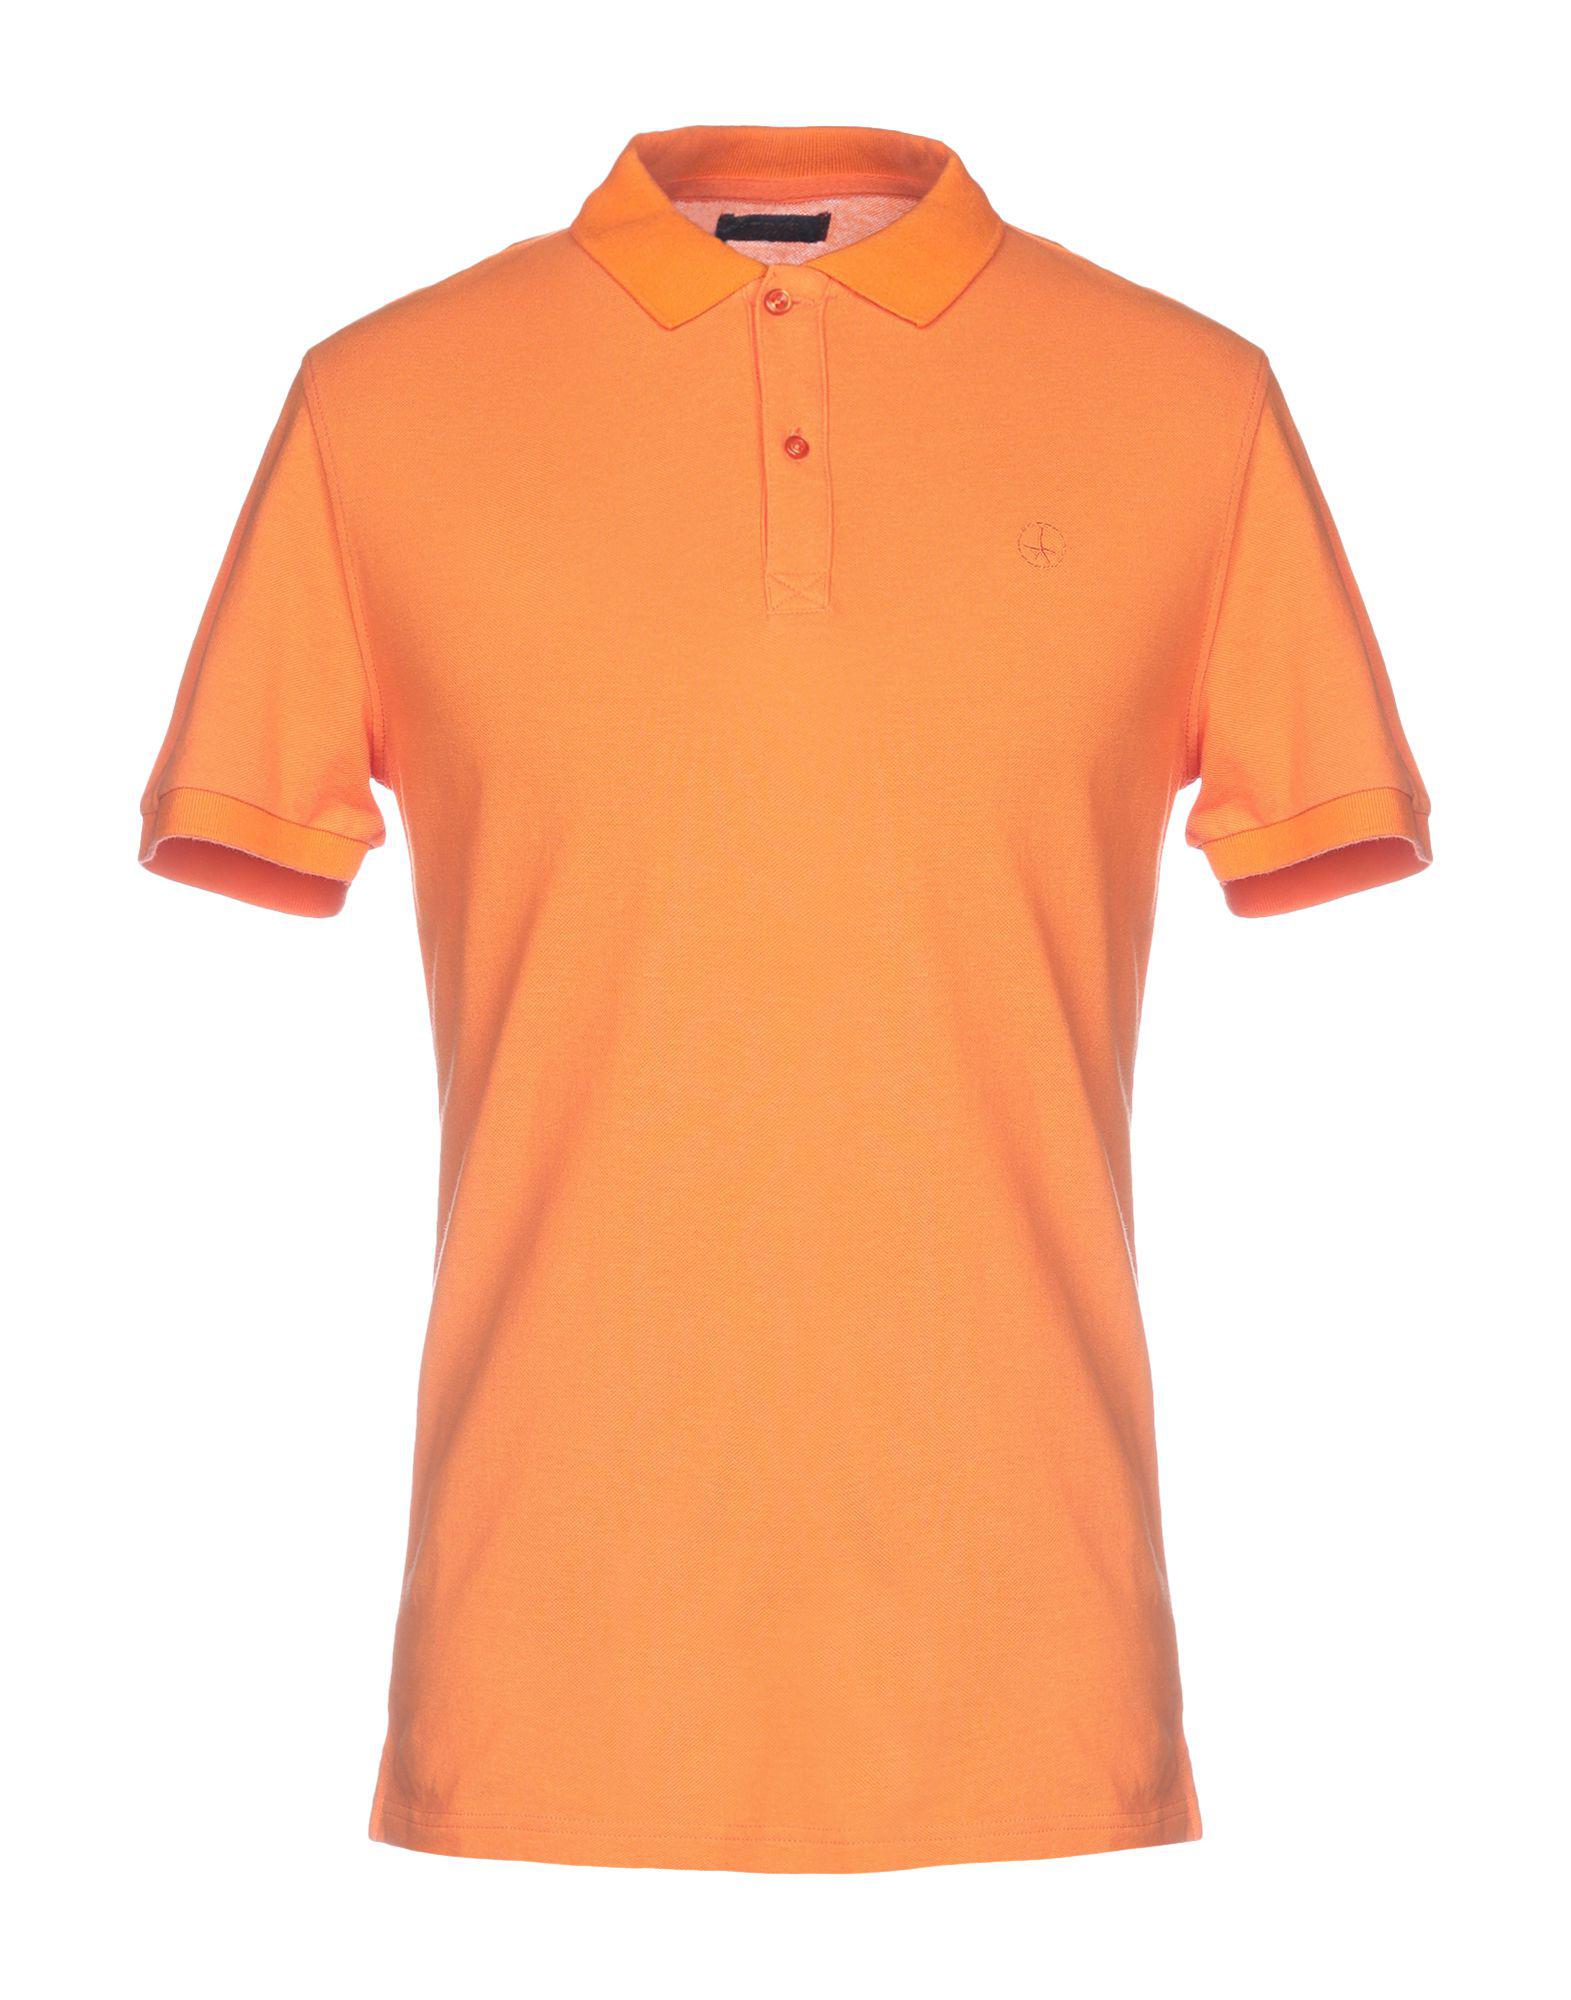 AT.P.CO Polo Shirt in Orange for Men - Lyst